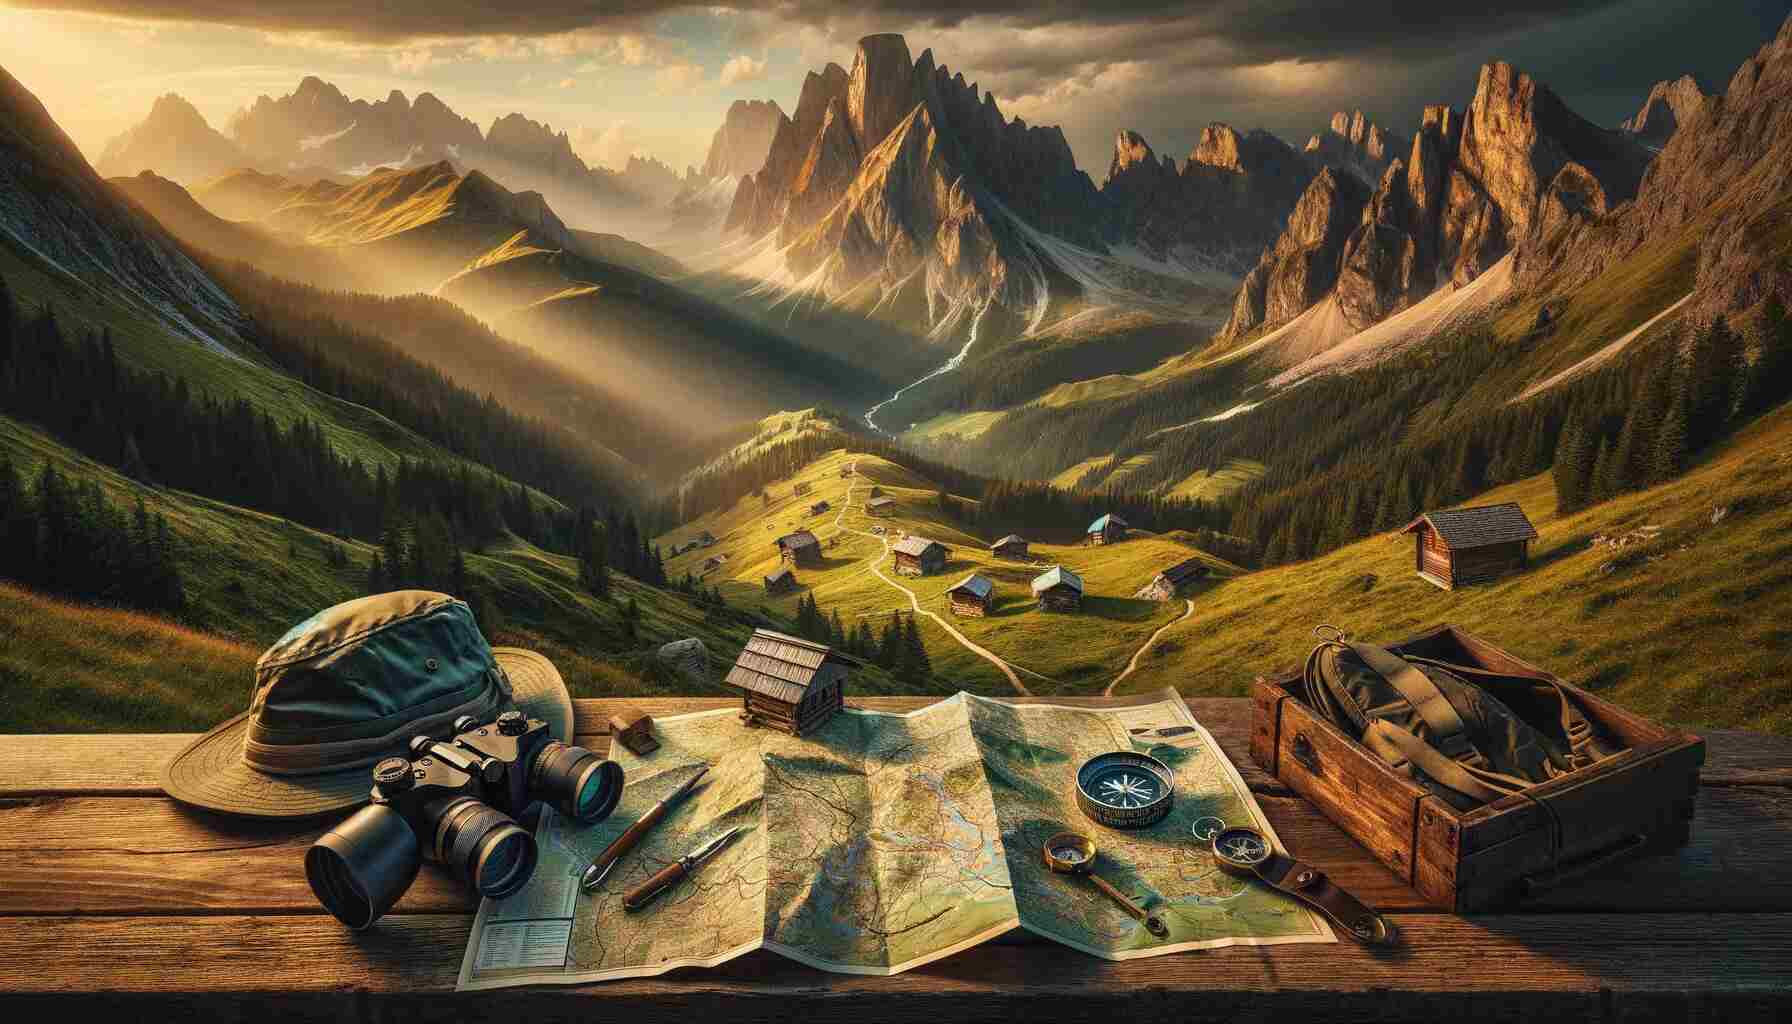 Panoramic view of a mountain range with lush greenery and rugged peaks. In the foreground, a wooden table holds an unfurled map, a compass, a hiking hat, and a pair of binoculars, symbolizing the planning of a hiking adventure. In the distance, small huts are visible along a winding trail in the mountains, suggesting a hut-to-hut hiking route. The scene is illuminated by the golden light of early morning, evoking a sense of adventure and exploration.